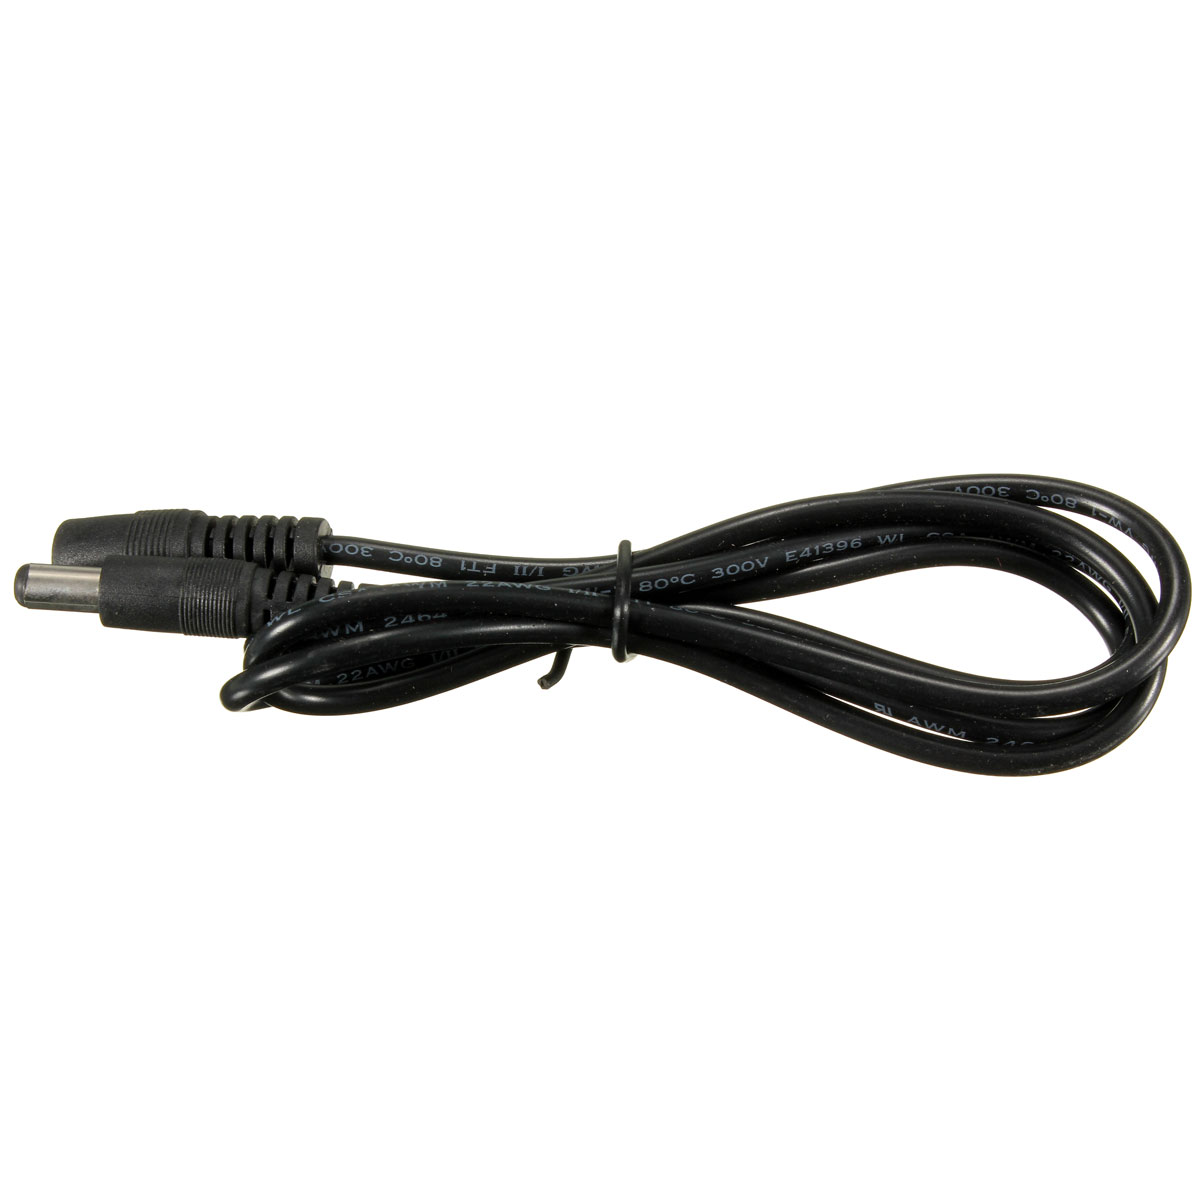 1M-DC-Power-Extension-Cable-DC-Jack-Female-to-Male-Plug-Cable-Adapter-Extension-Cord-Connector-1246600